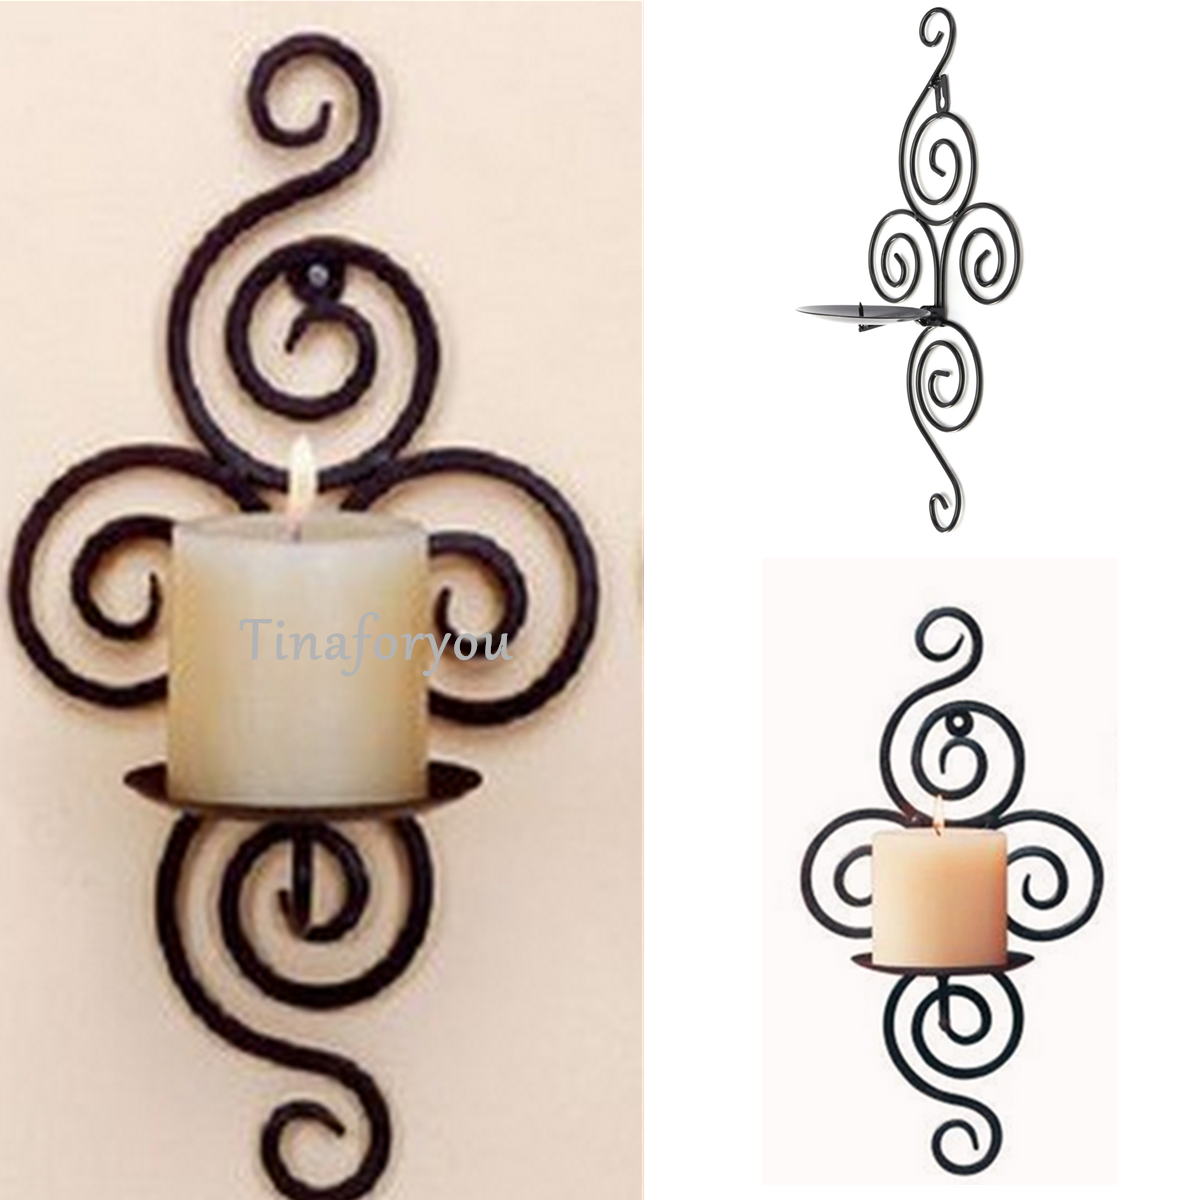 Iron Scroll Candle Holder Candlestick Wall Hanging Sconce Wedding Home Decorations